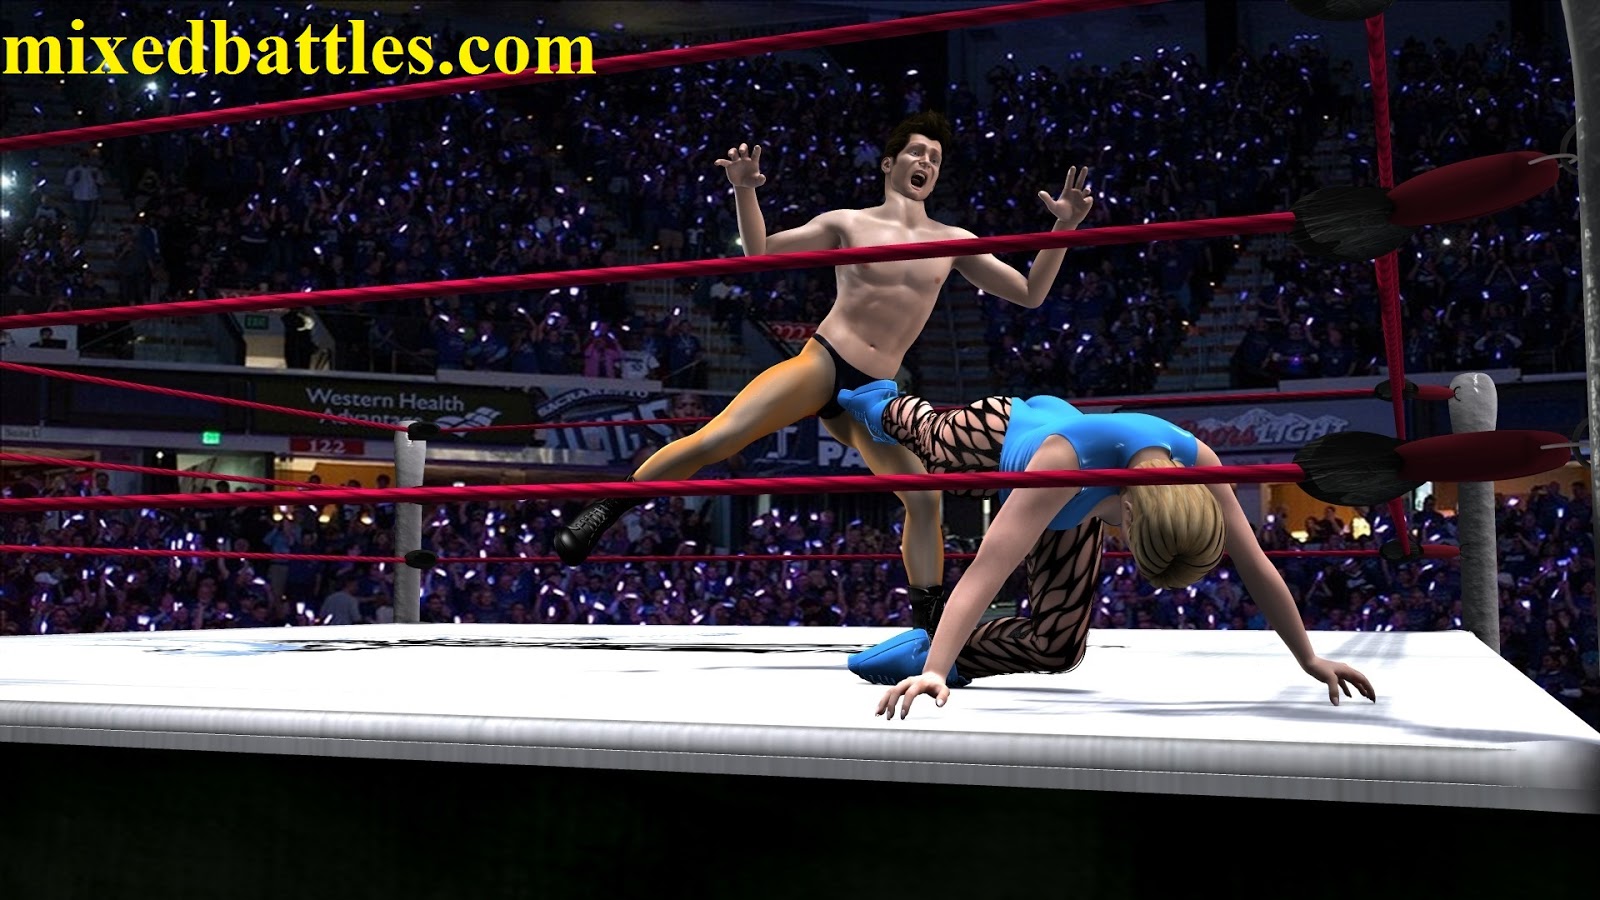 Mixed wrestling evolved fights